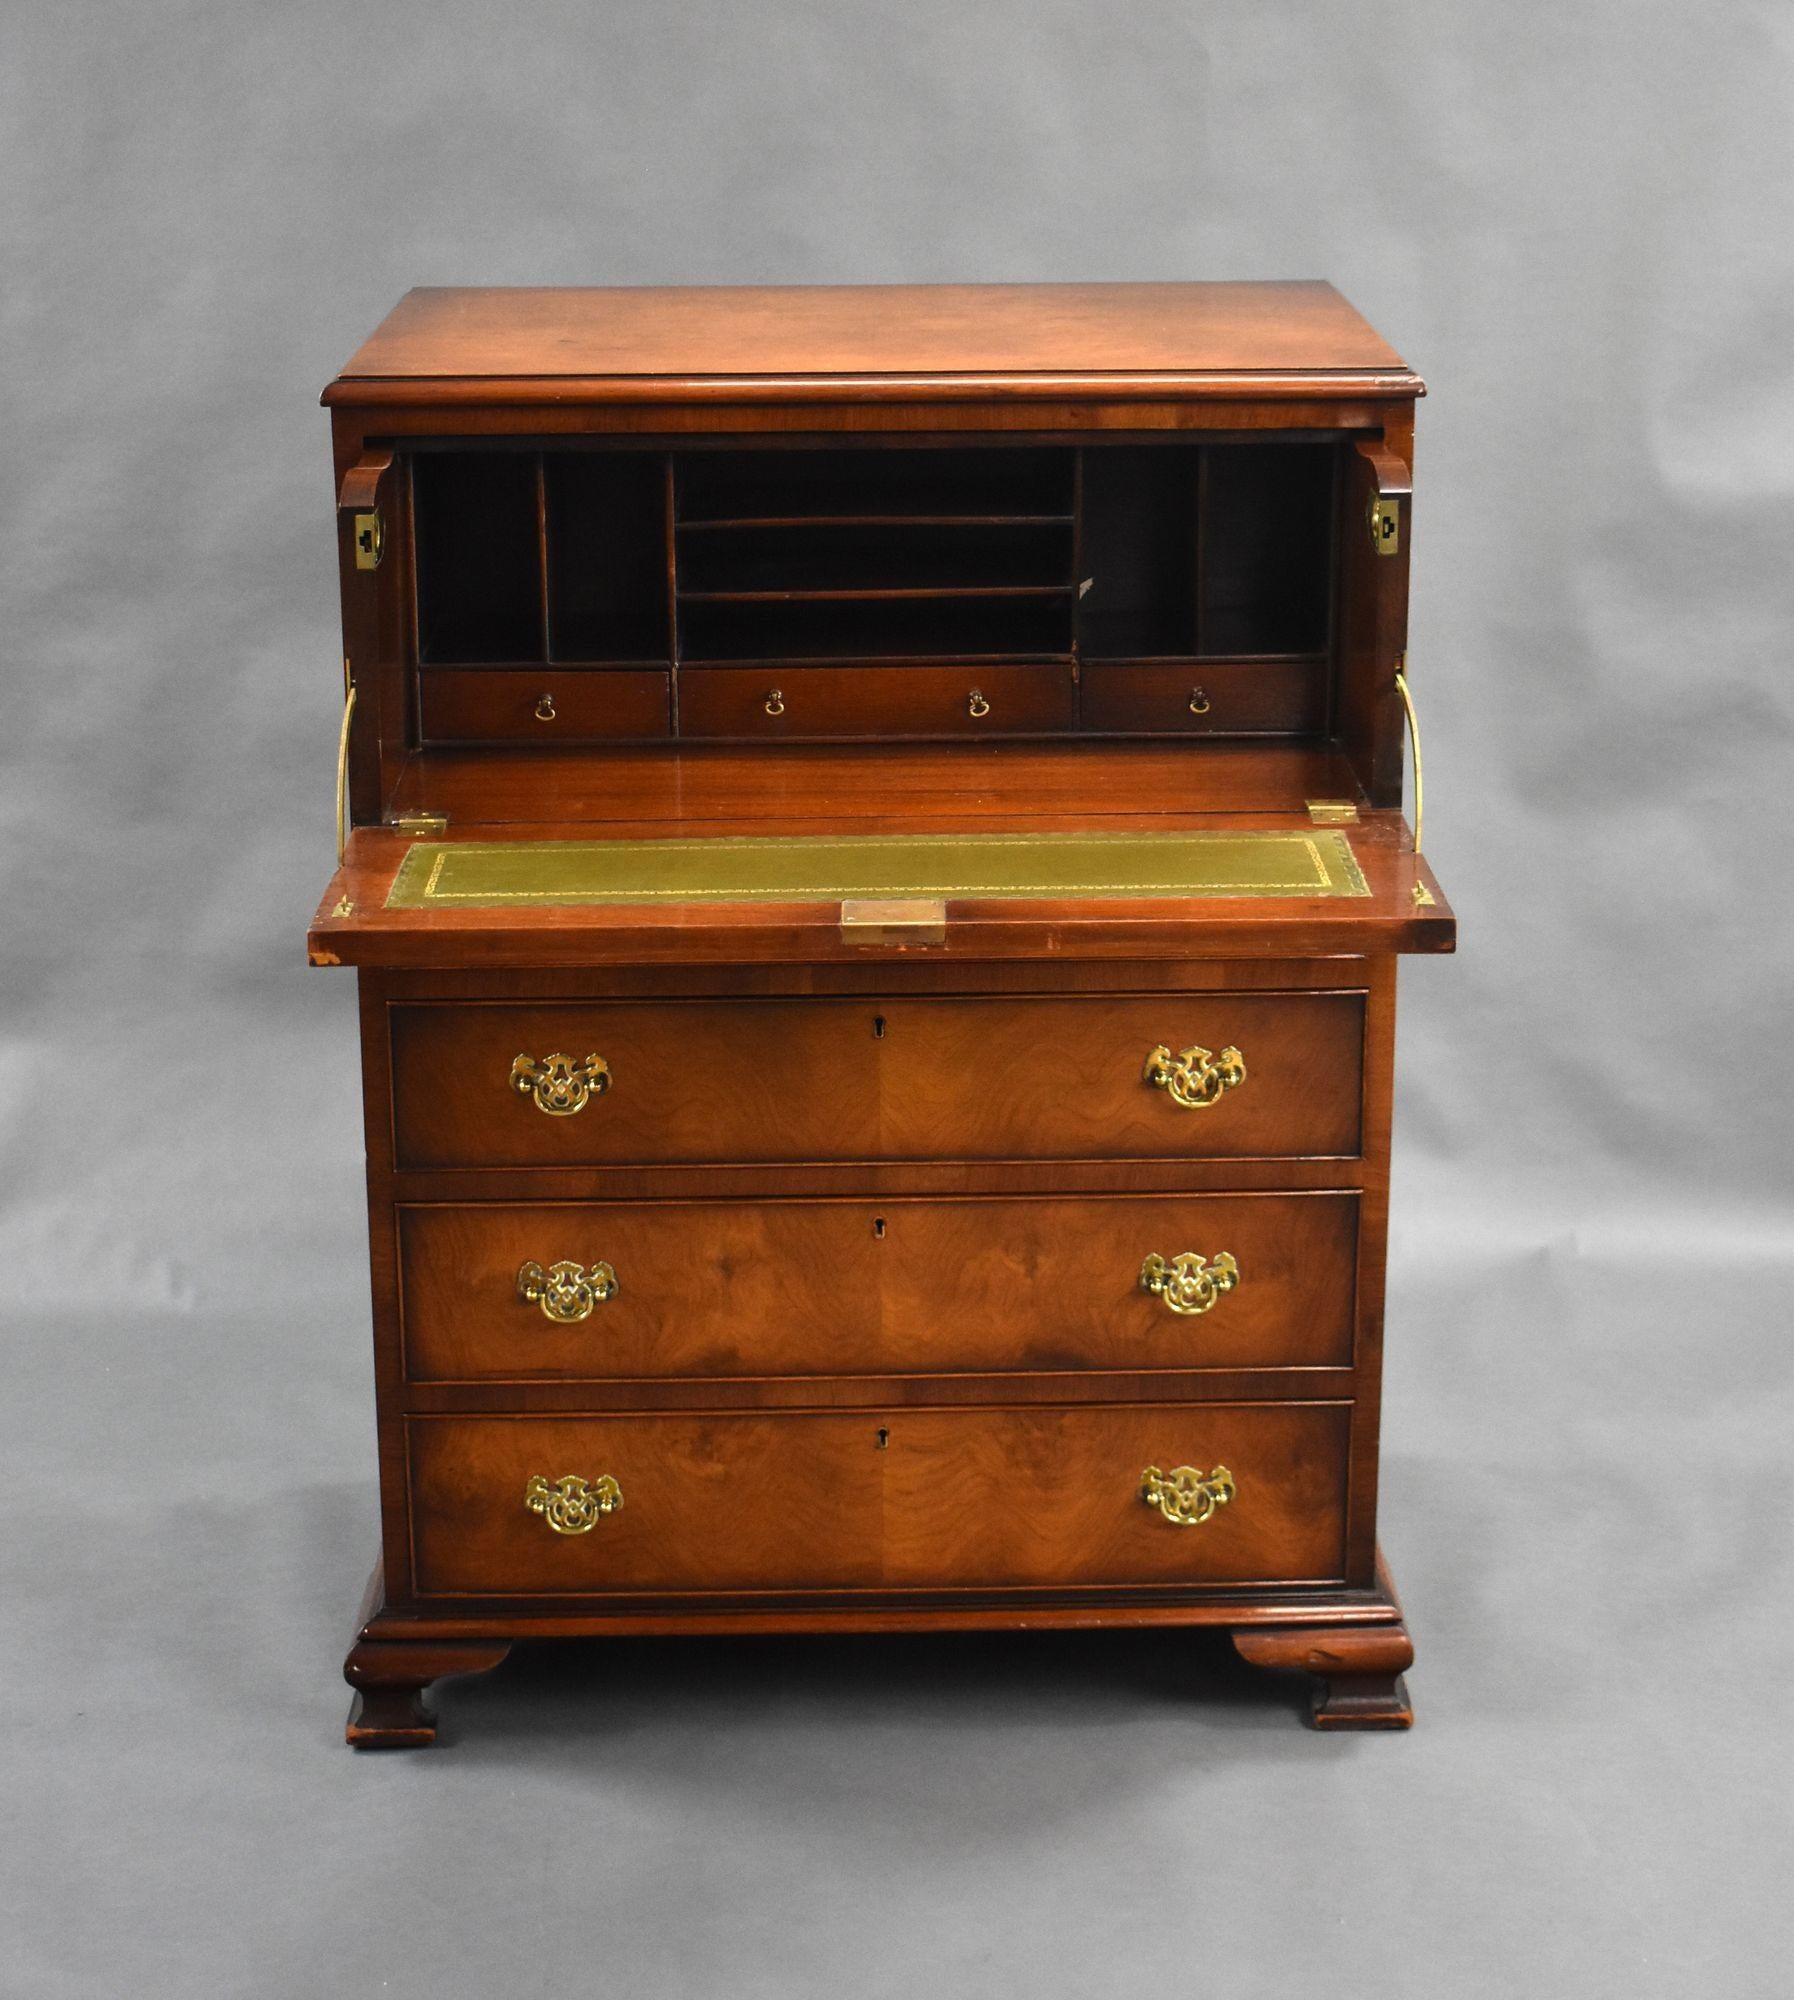 Antique Figured Walnut Secretaire Chest of Drawers In Good Condition For Sale In Chelmsford, Essex